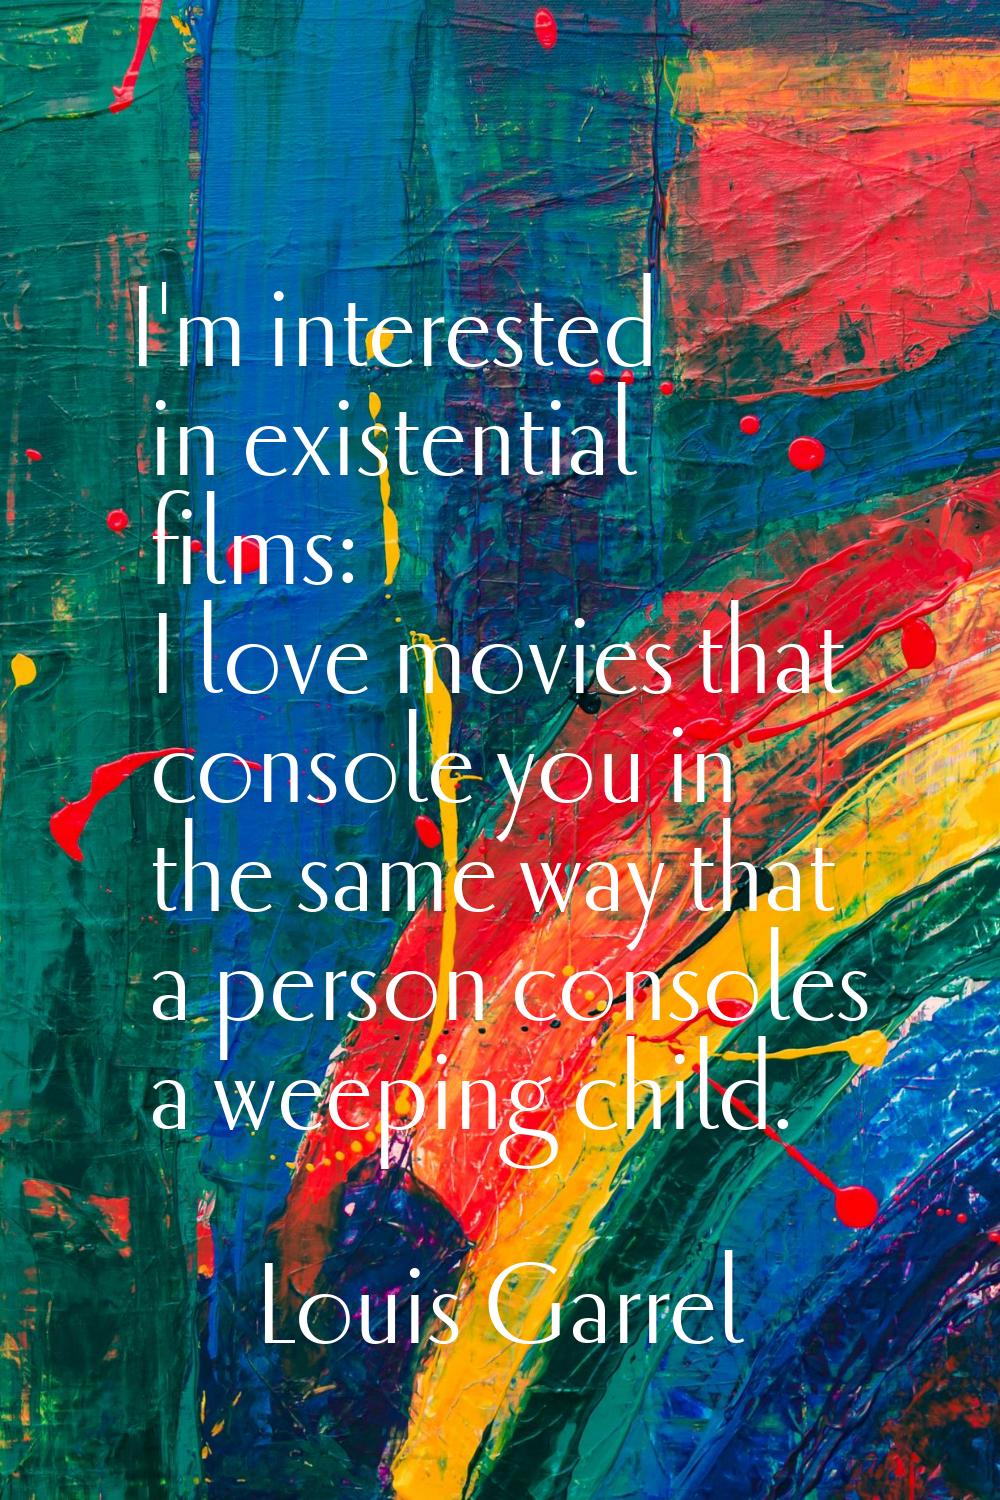 I'm interested in existential films: I love movies that console you in the same way that a person c